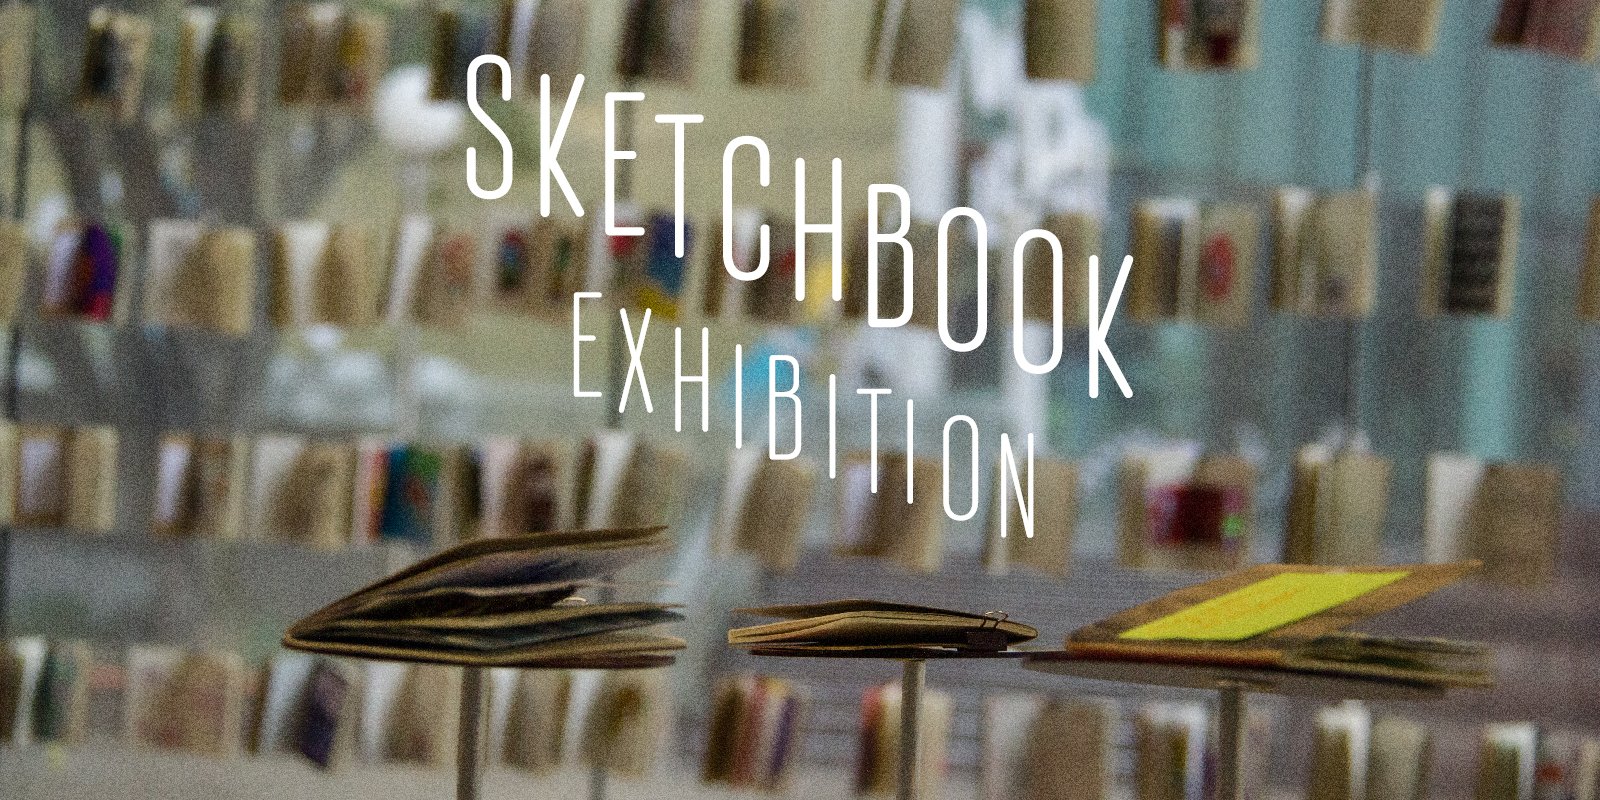 The Sketchbook Project Exhibition